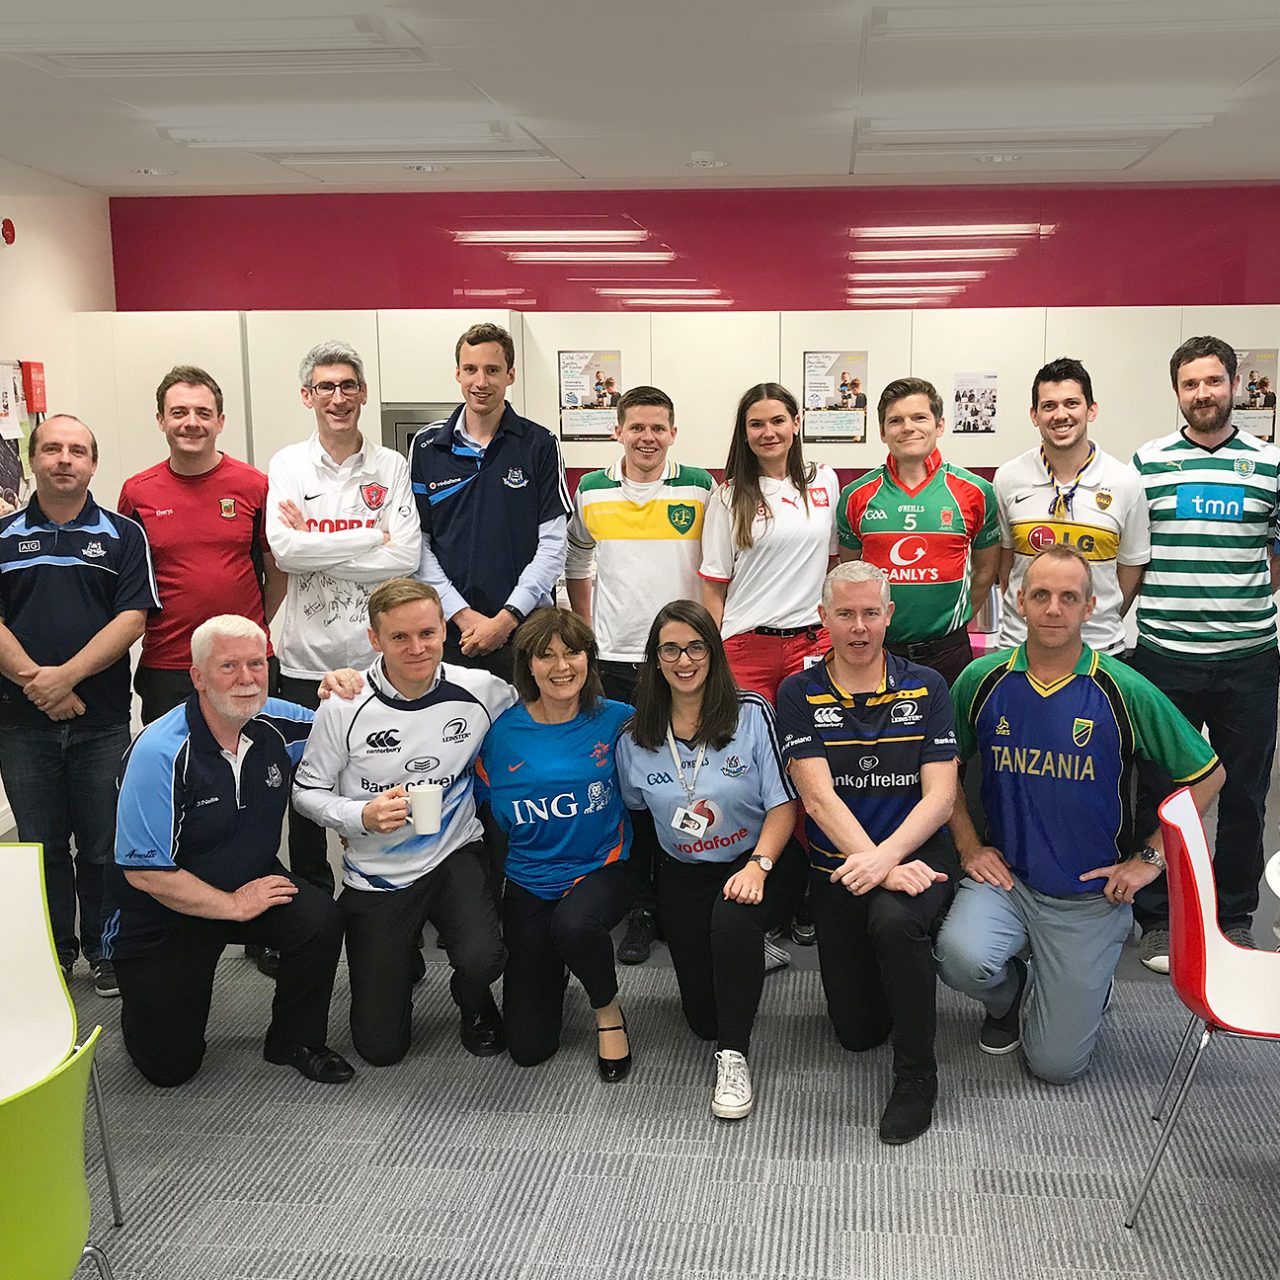 Dublin staff wear their favourite sporting jersey to win the most devoted fan and support local homeless people